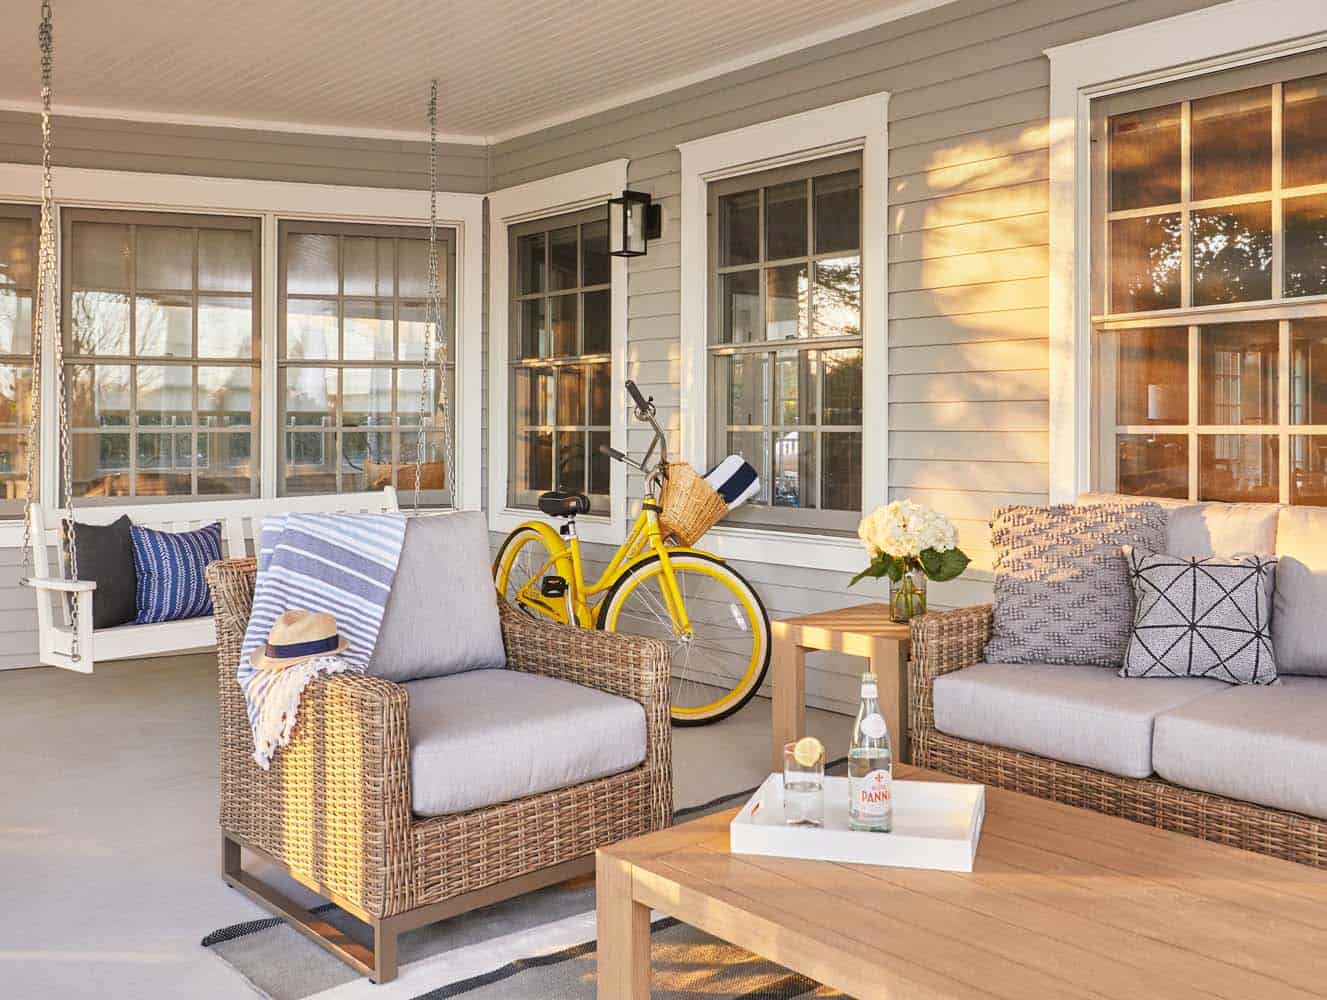 beach style covered patio with outdoor wicker furniture and a hanging swing